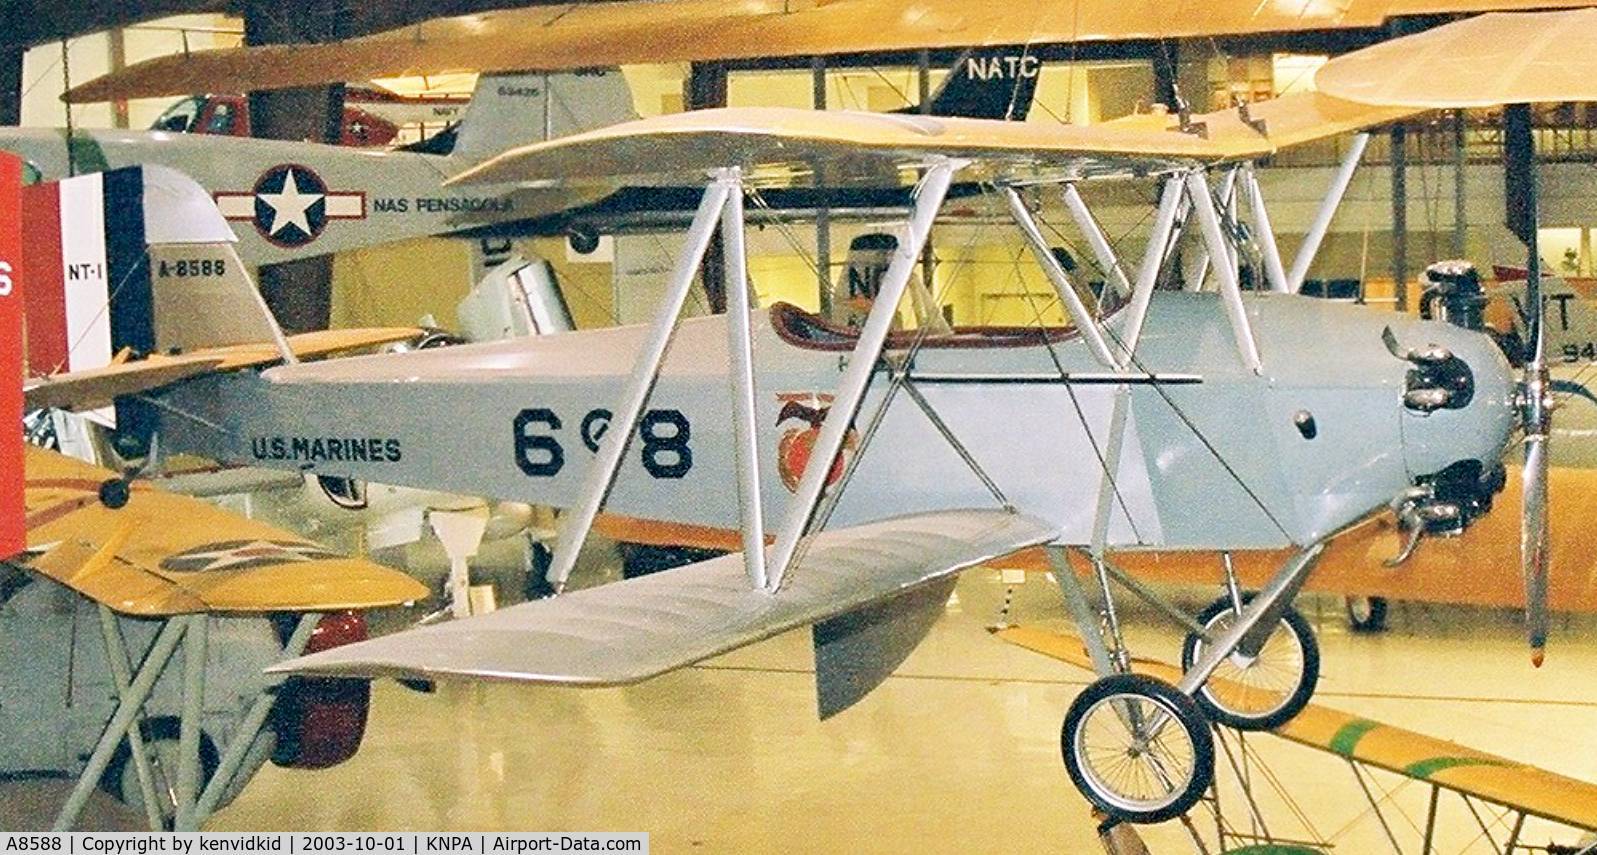 A8588, 1929 New Standard NT-1 C/N 1007, On display at the Museum of Naval Aviation, Pensacola.